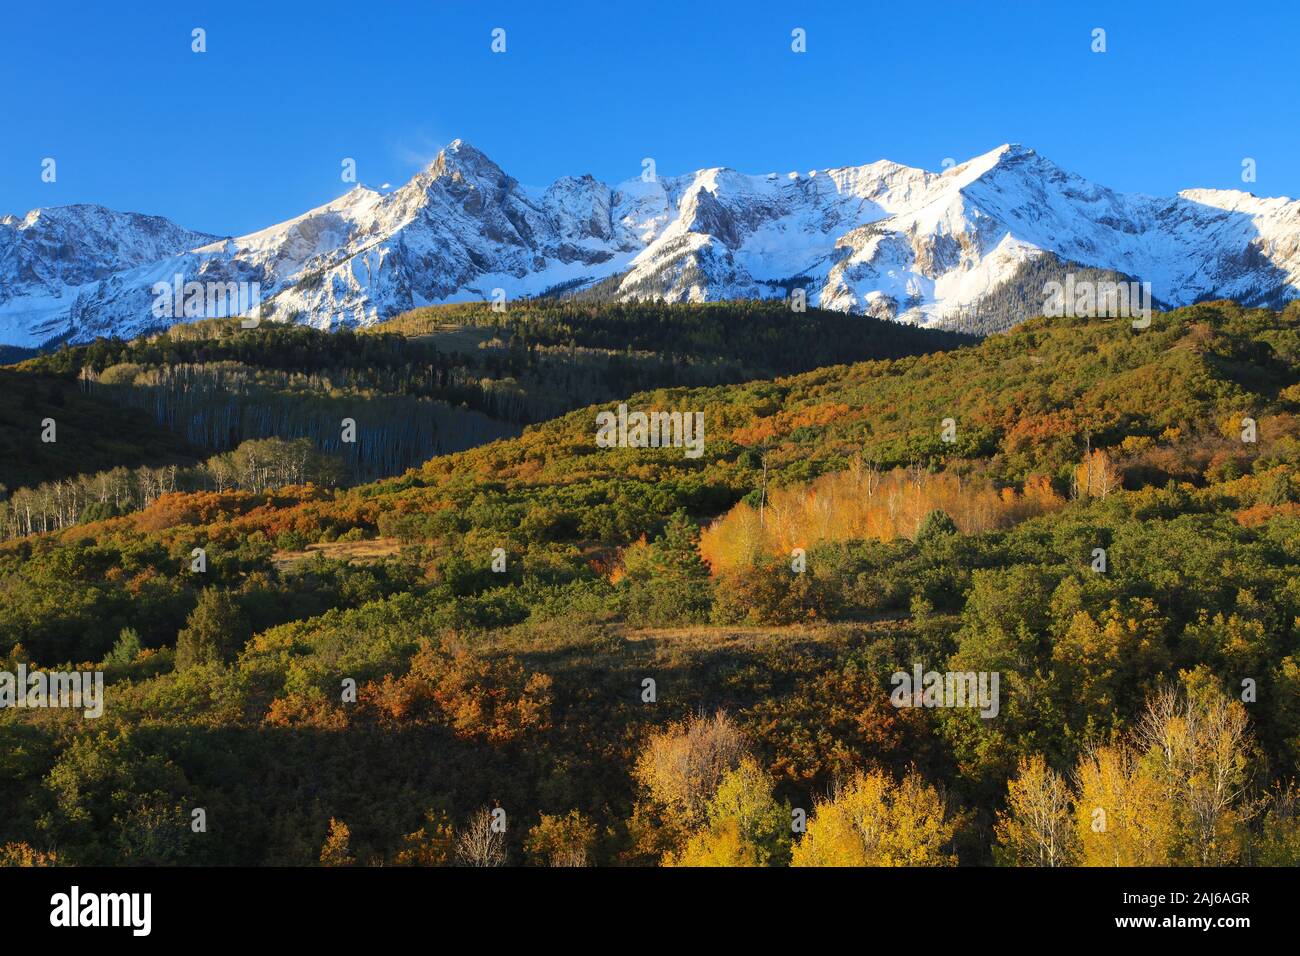 Autumn color in the Colorado Rocky Mountains along the Dallas Divide with snow and changing aspen leaves Stock Photo